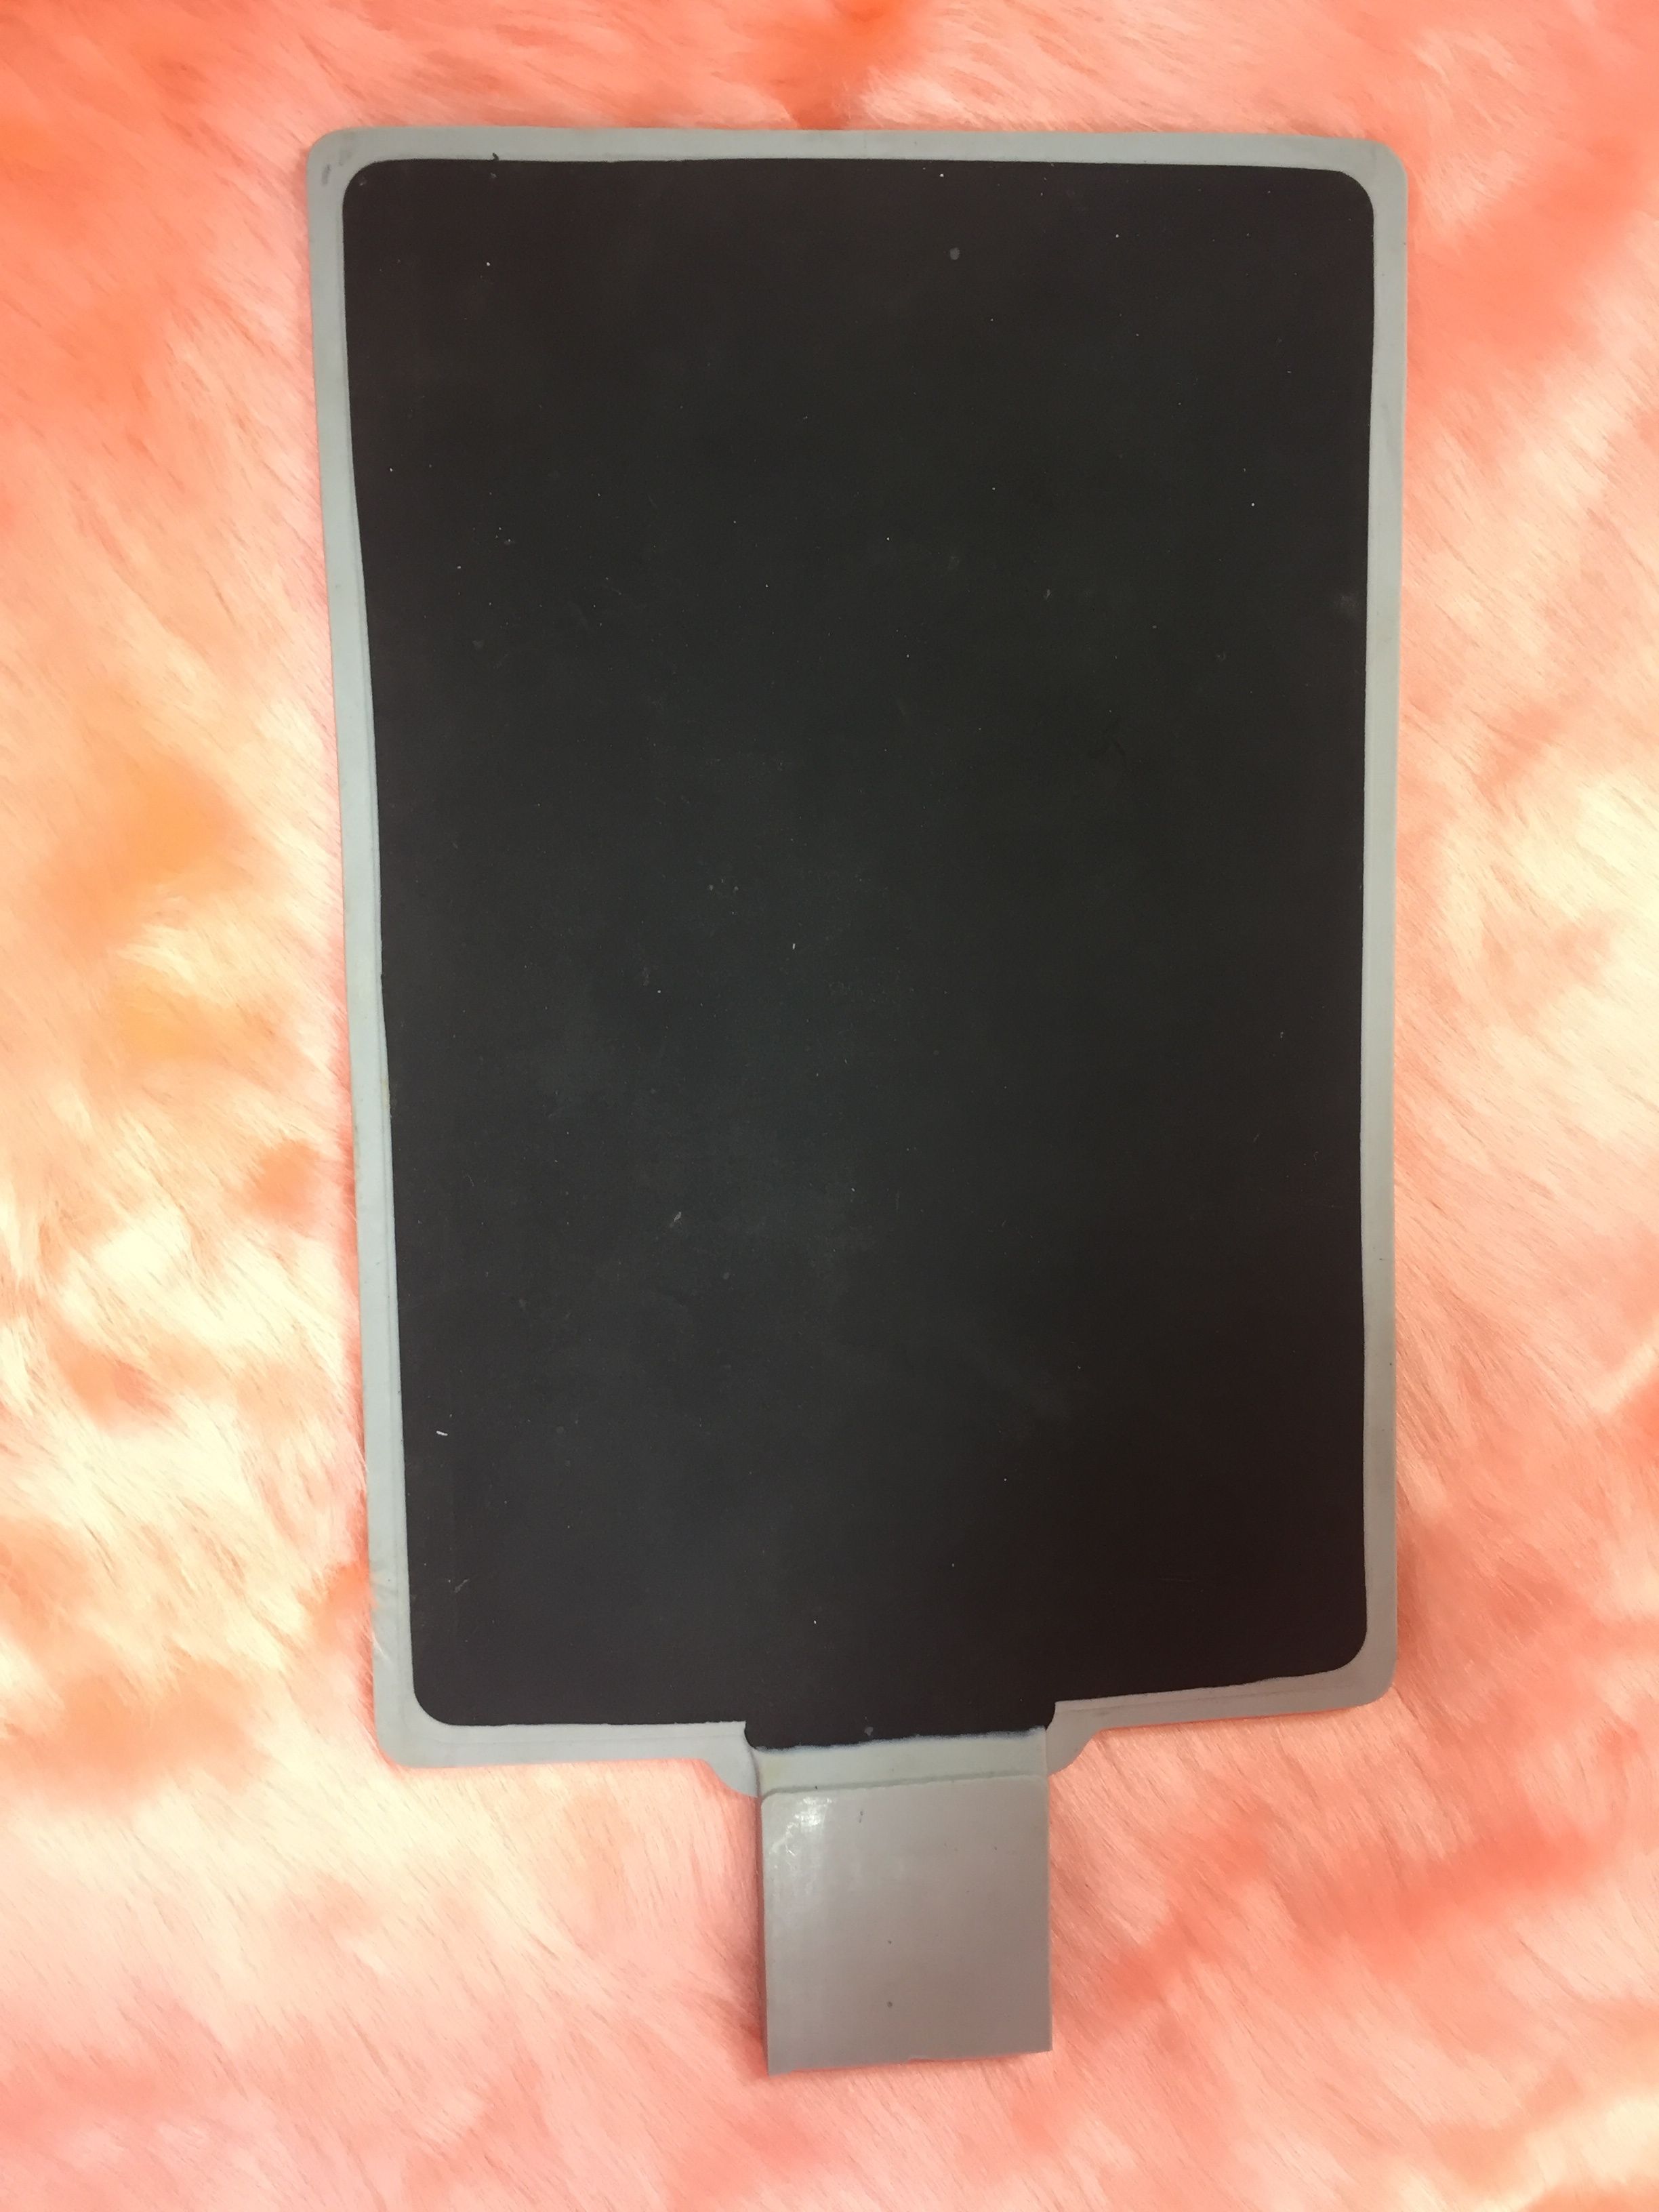 Silicon Rubber Patient Plate Without Cable Cord (Detachable)